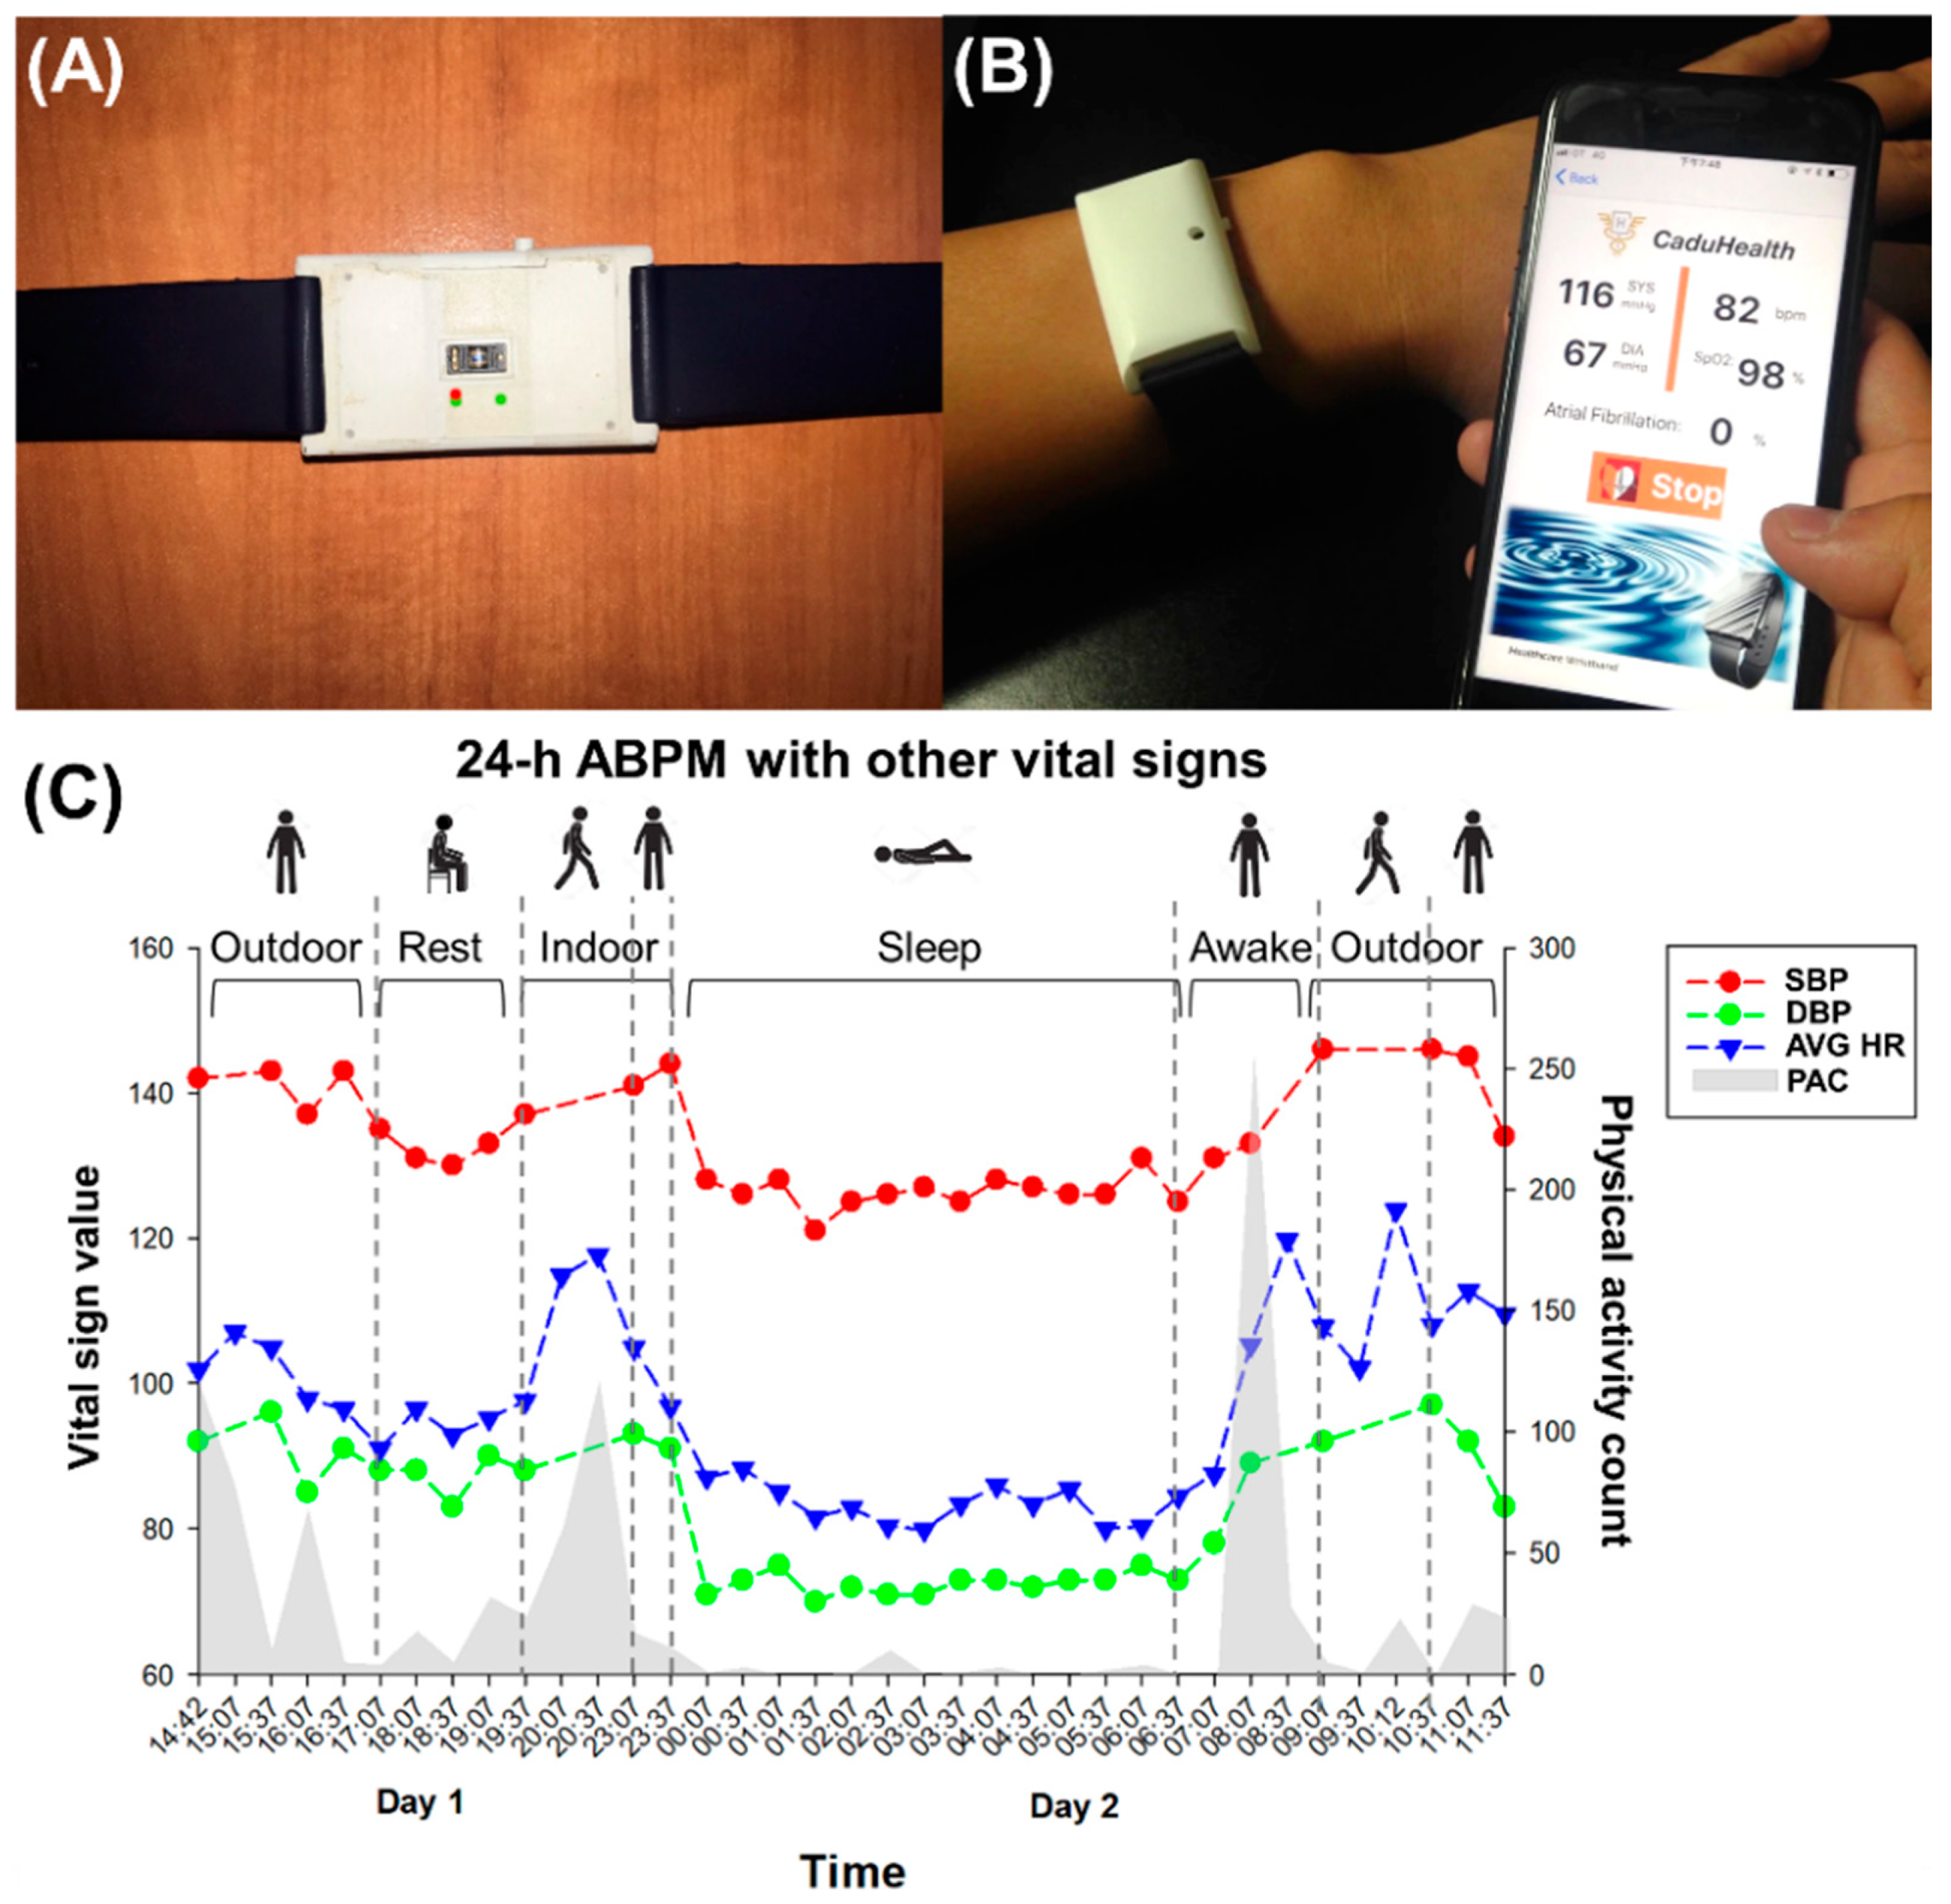 Correlation analysis of human upper arm parameters to oscillometric signal  in automatic blood pressure measurement